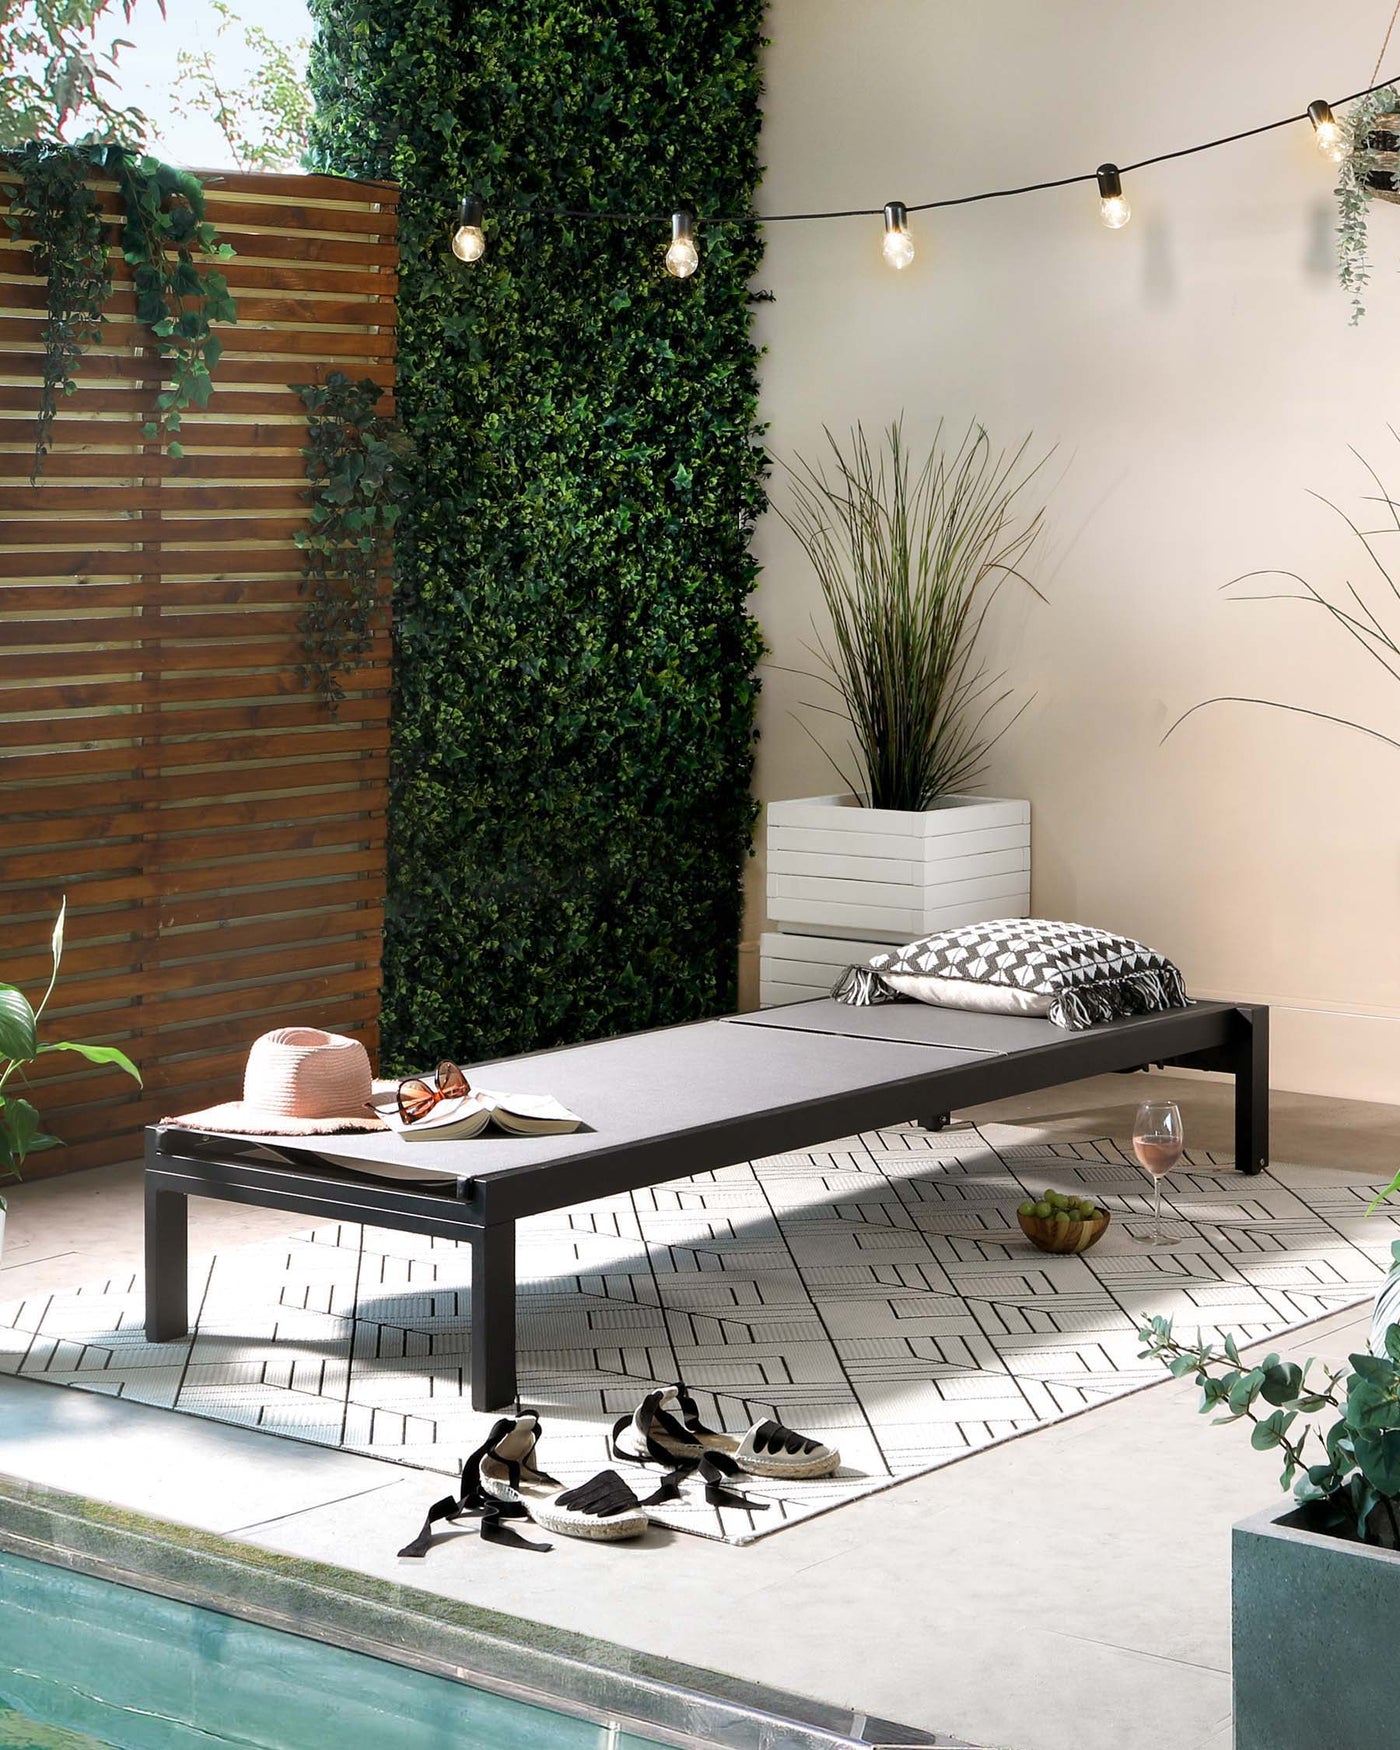 Sophisticated outdoor setting featuring a sleek, modern lounging daybed with a matte black frame and grey cushioning. A stylish black and white patterned outdoor rug anchors the space, complementing the contemporary look.